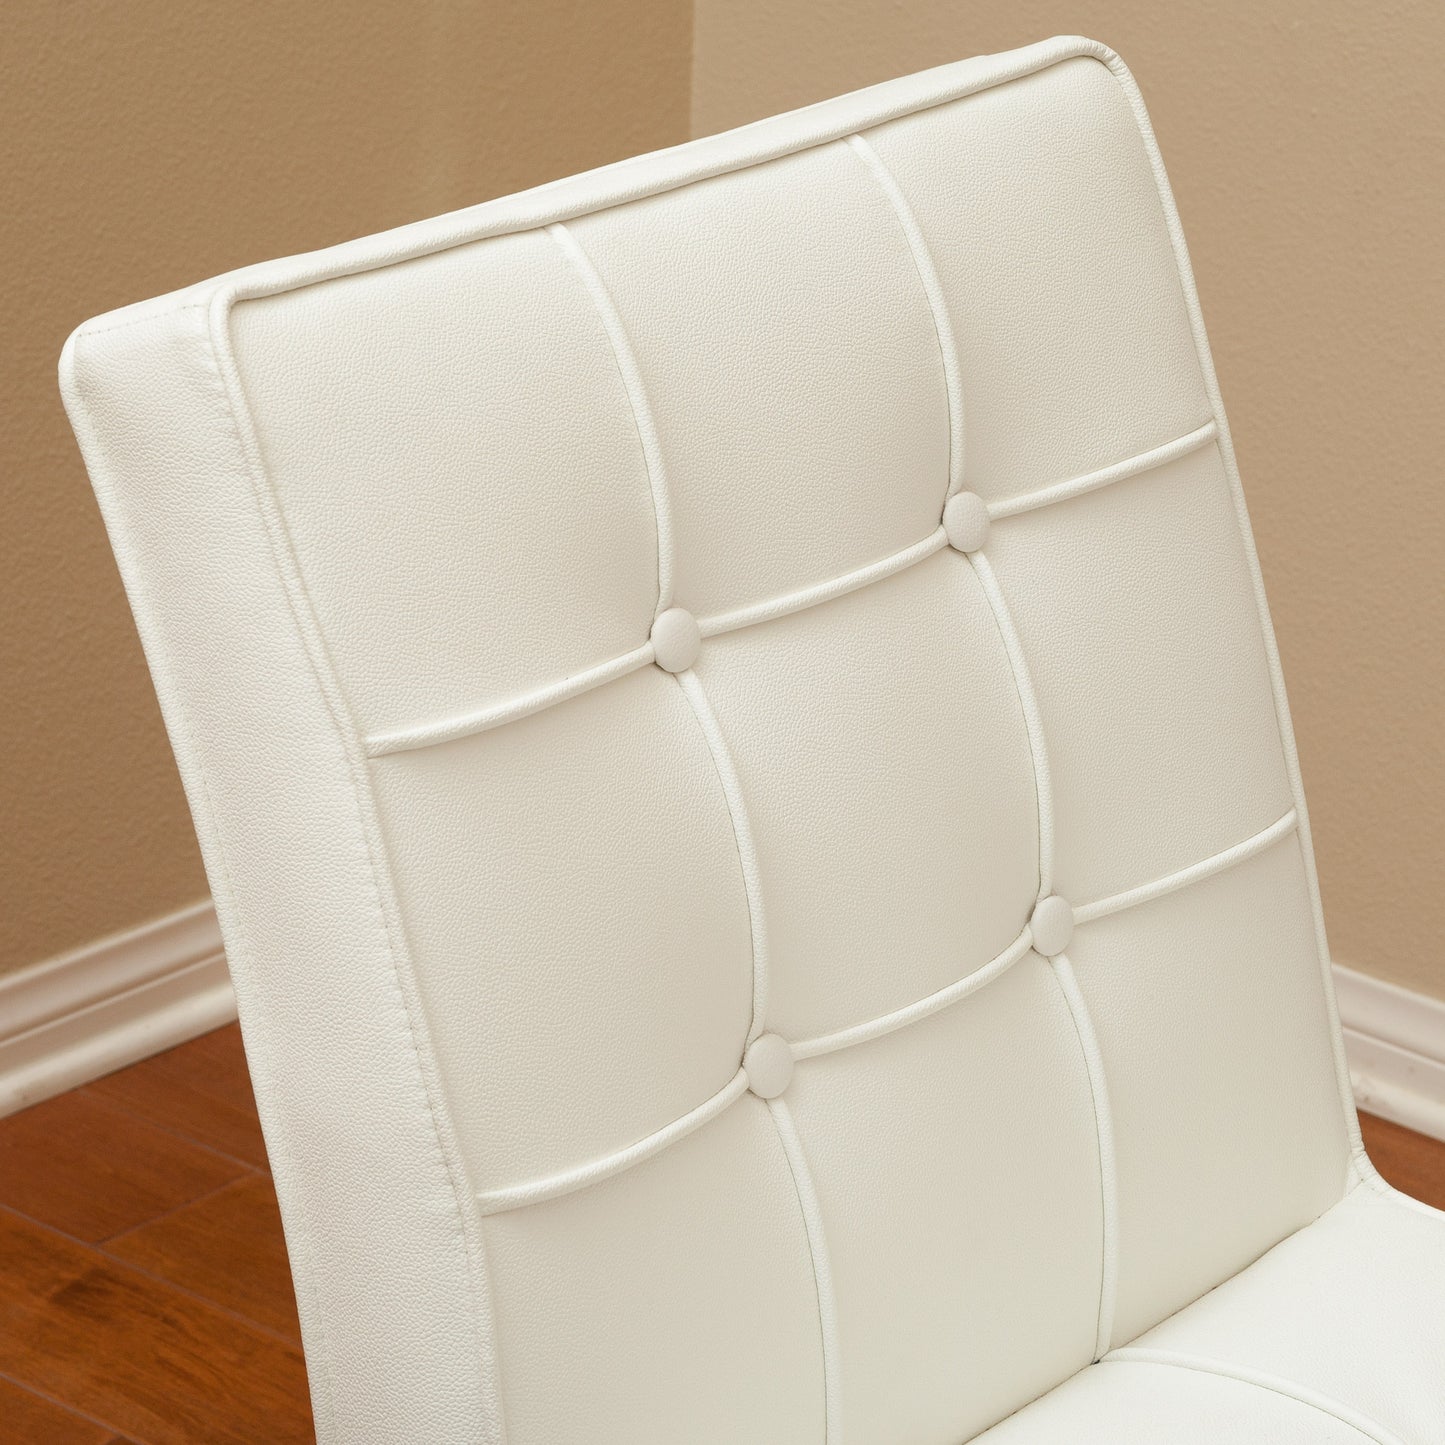 Pandora Modern Bonded Leather Dining Chair in White